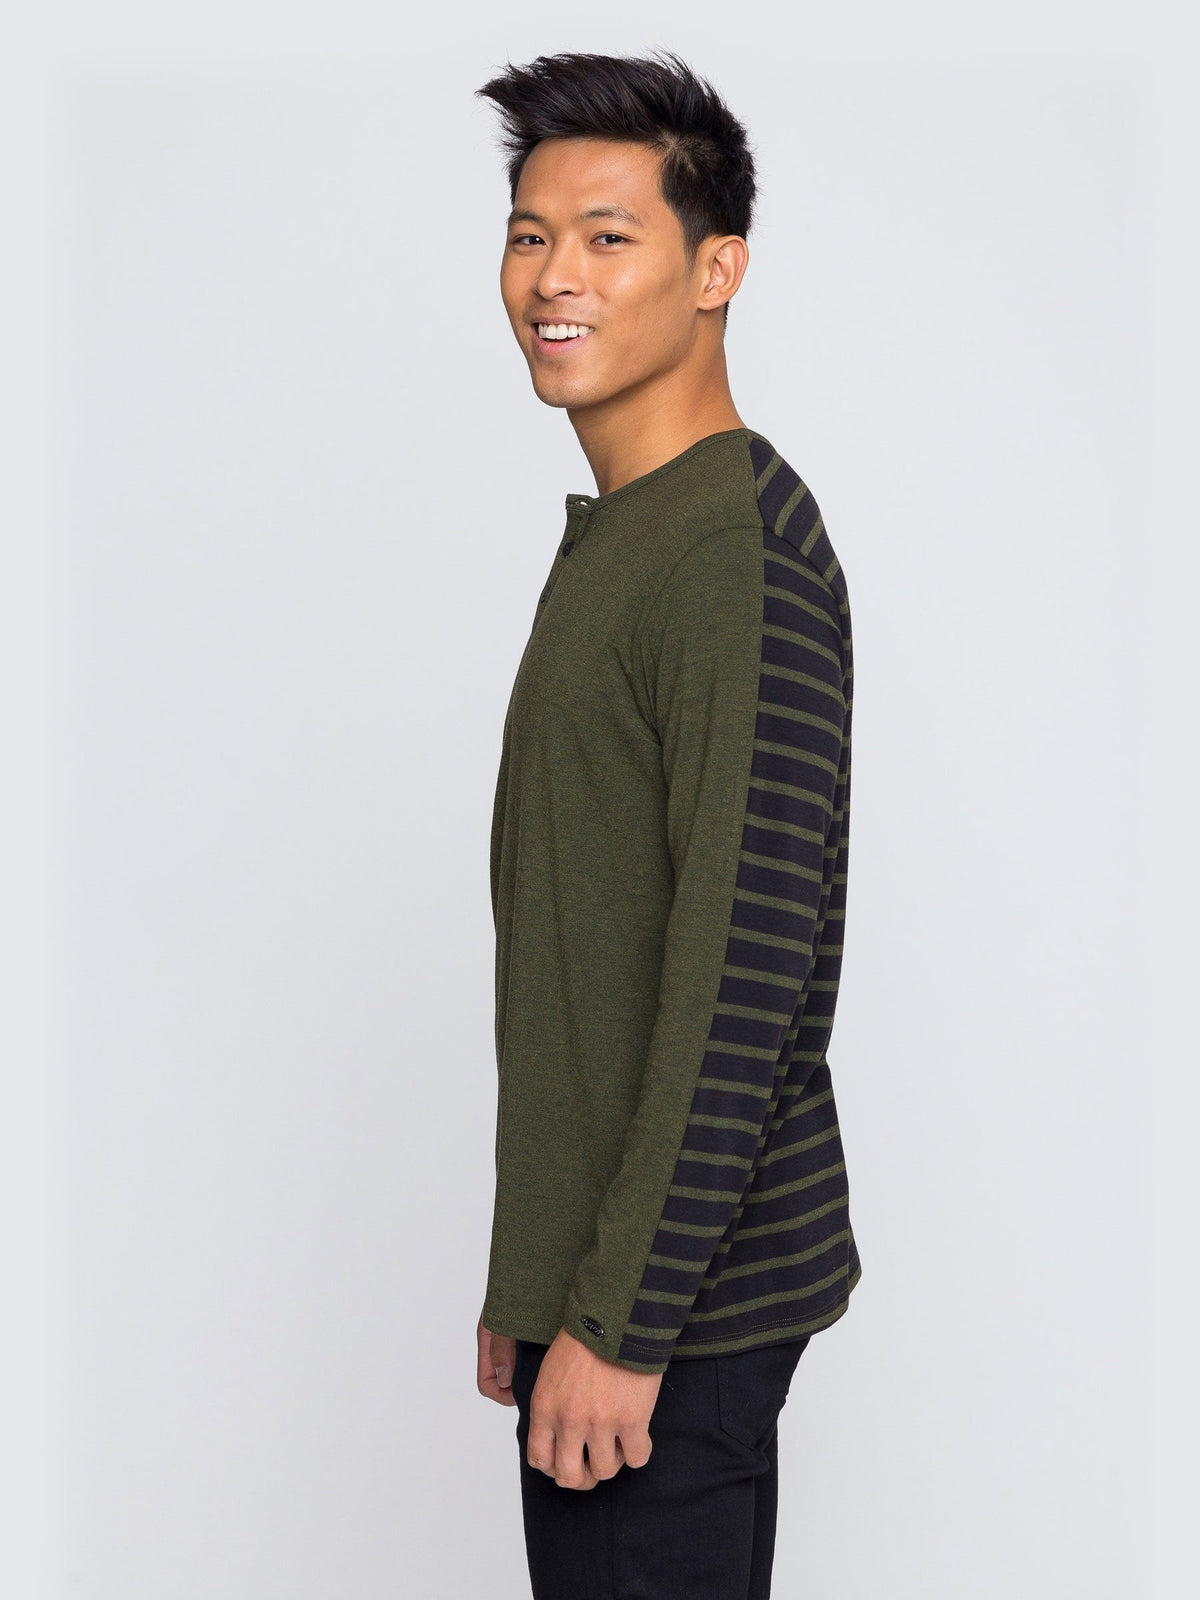 Two Blind Brothers - Mens Men's Long Sleeve Striped Henley Teal